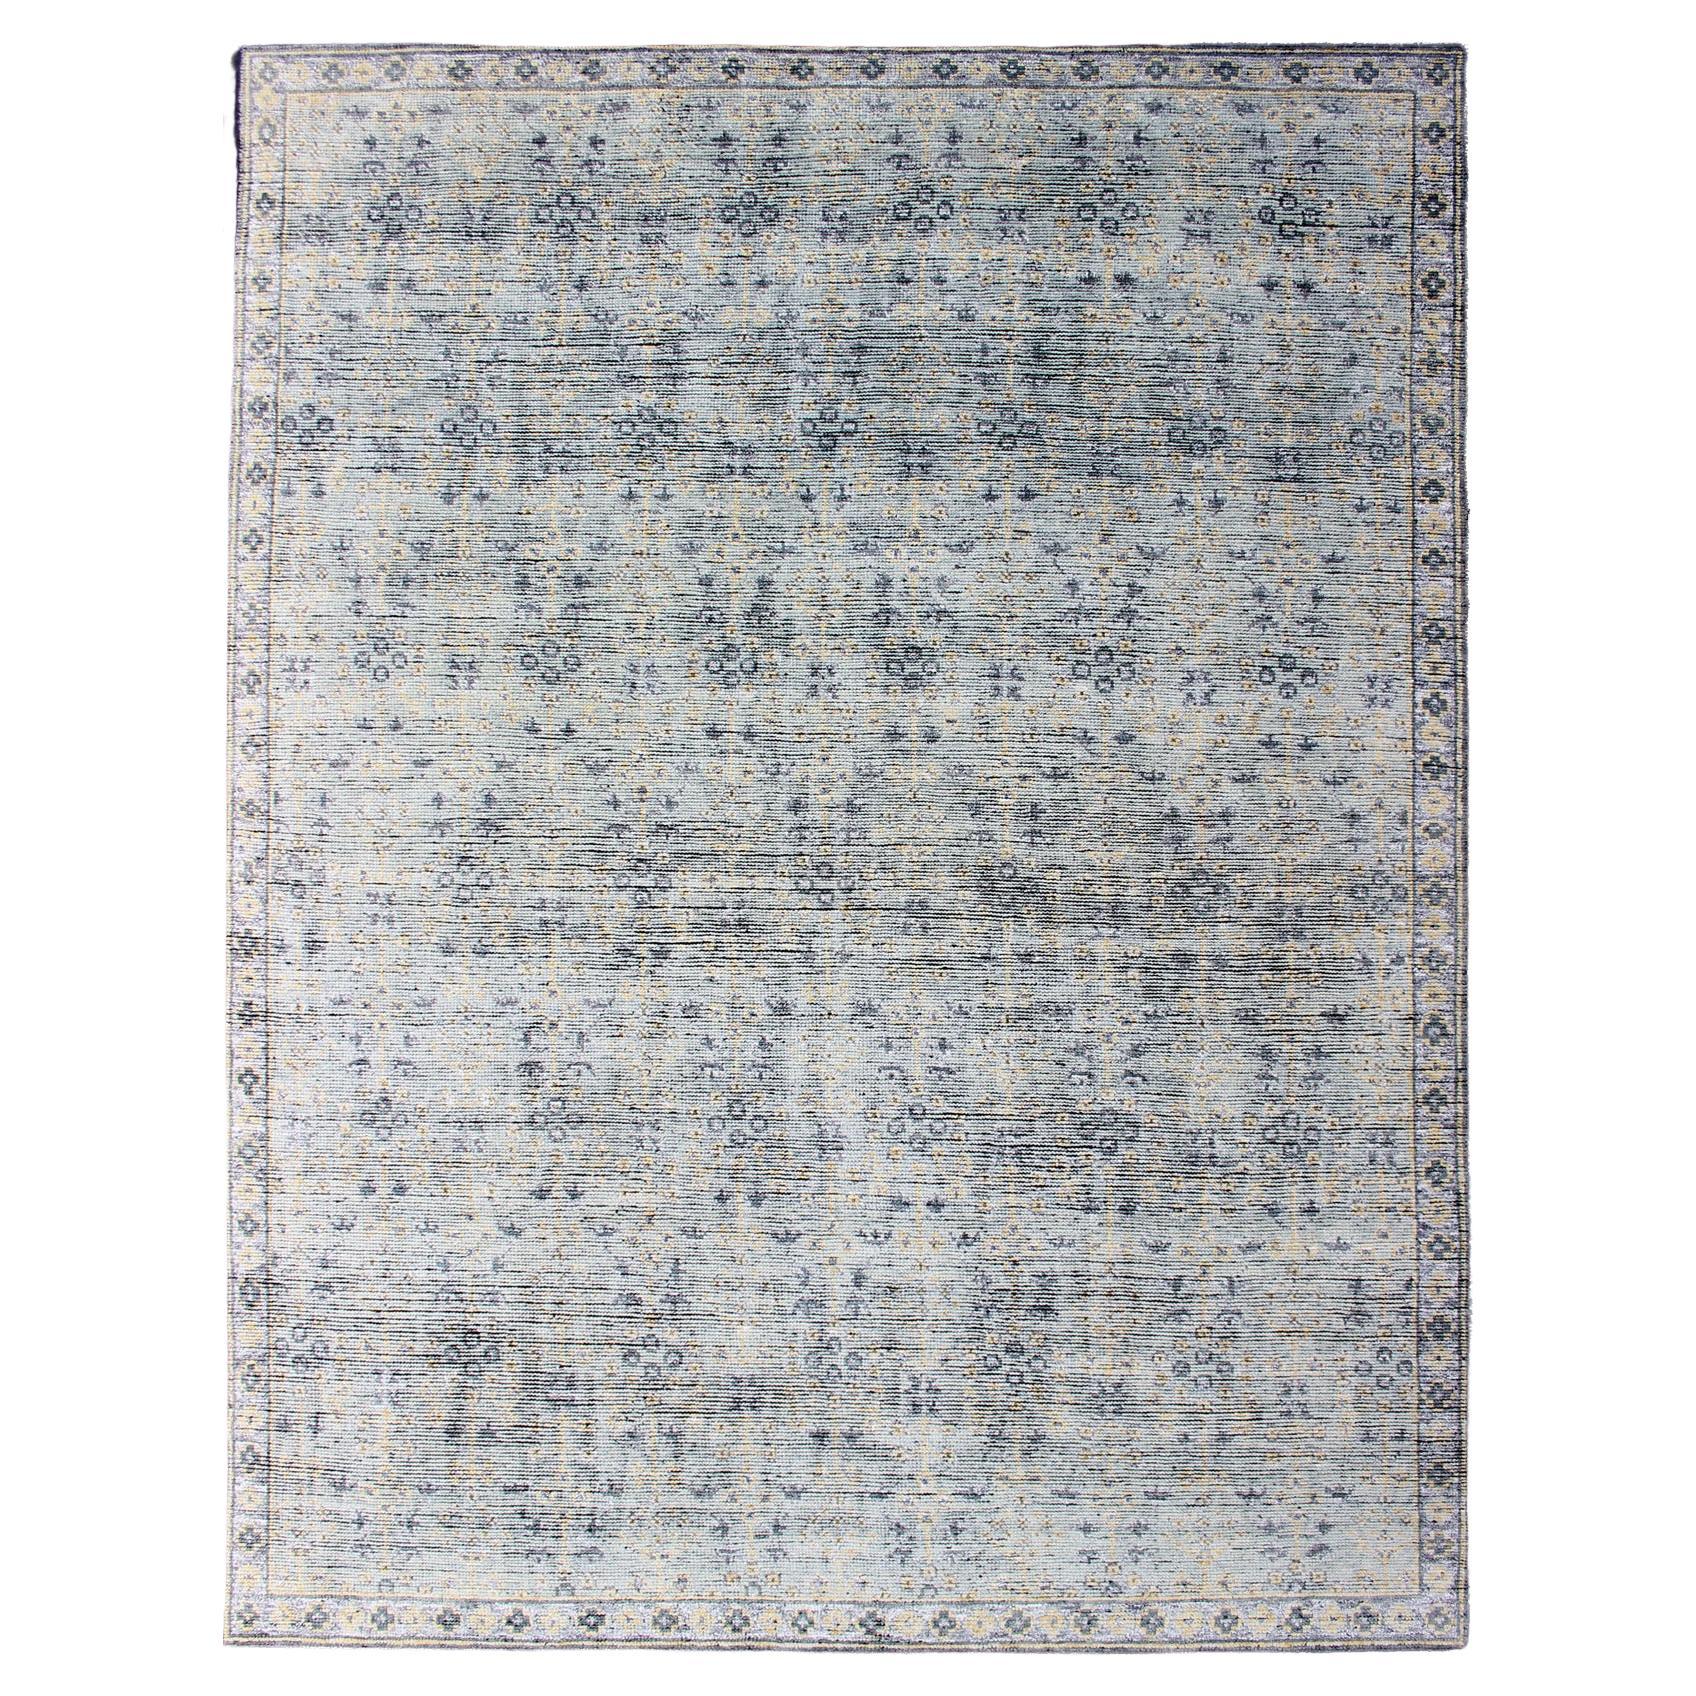 Keivan Woven Arts Distressed Modern Hand-Woven wool Rug  8'1 x 11'2 For Sale